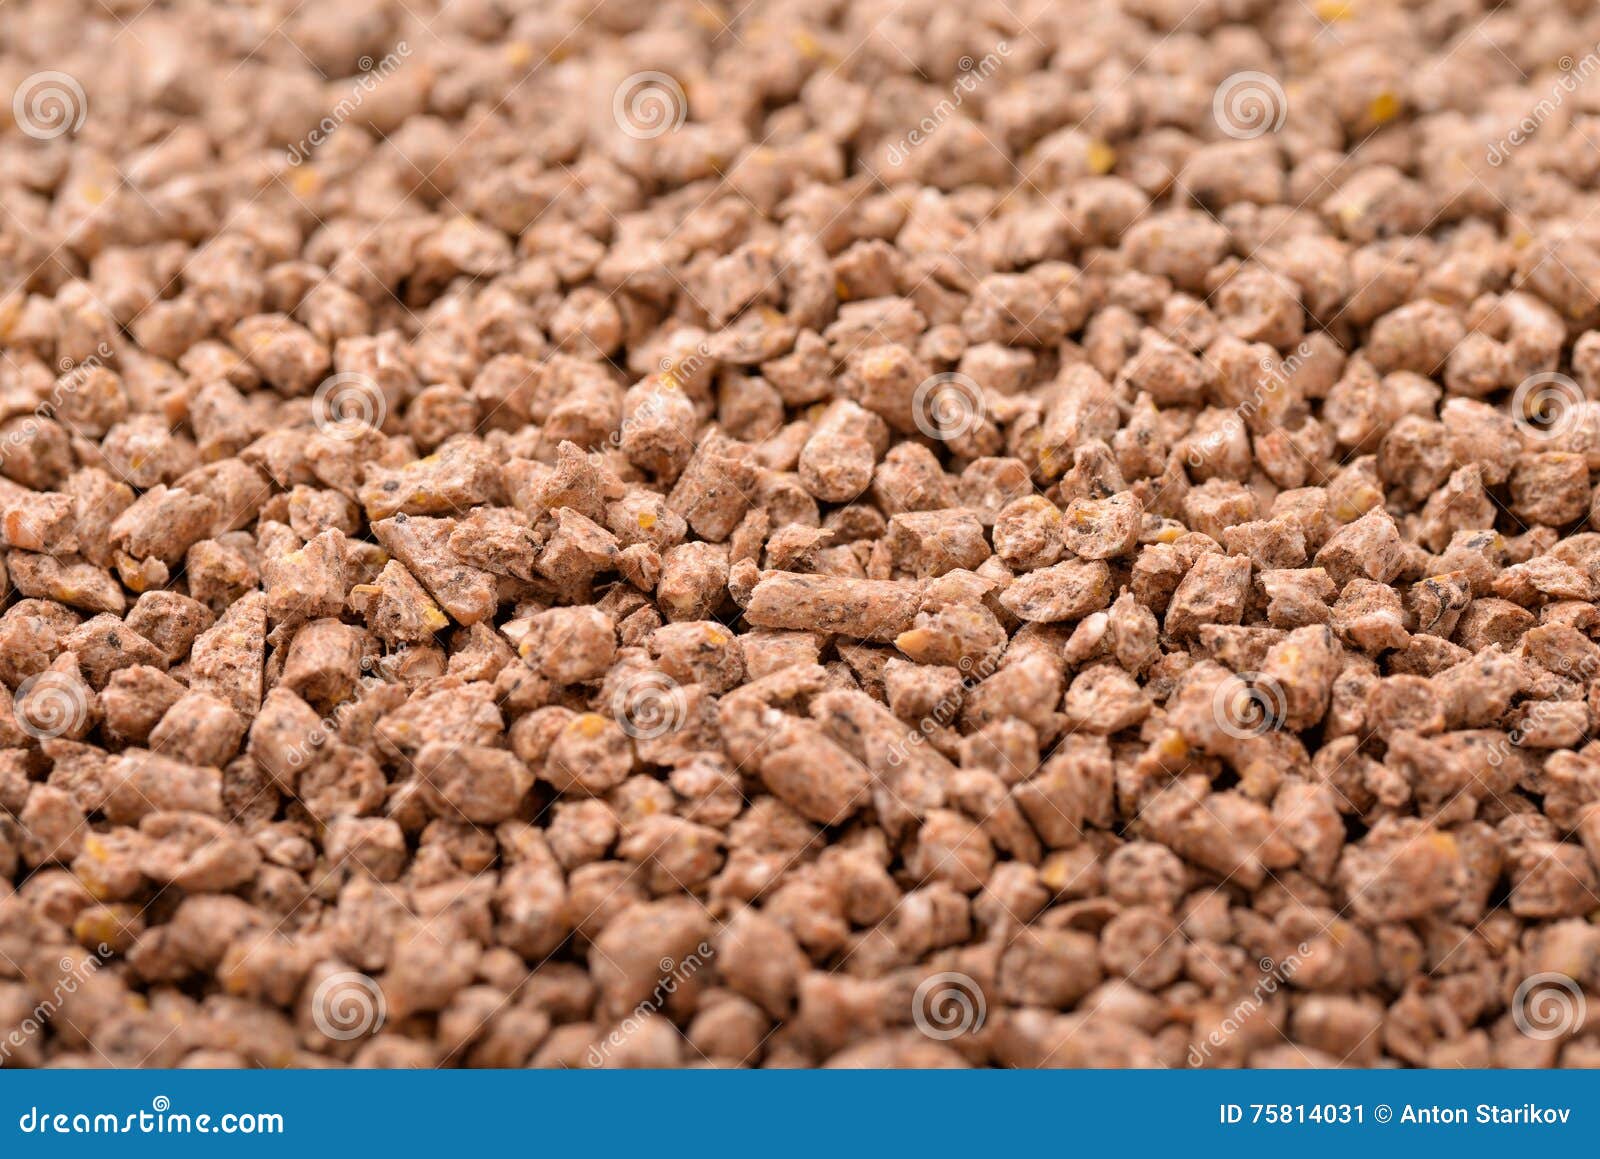 animals compound feed pellets